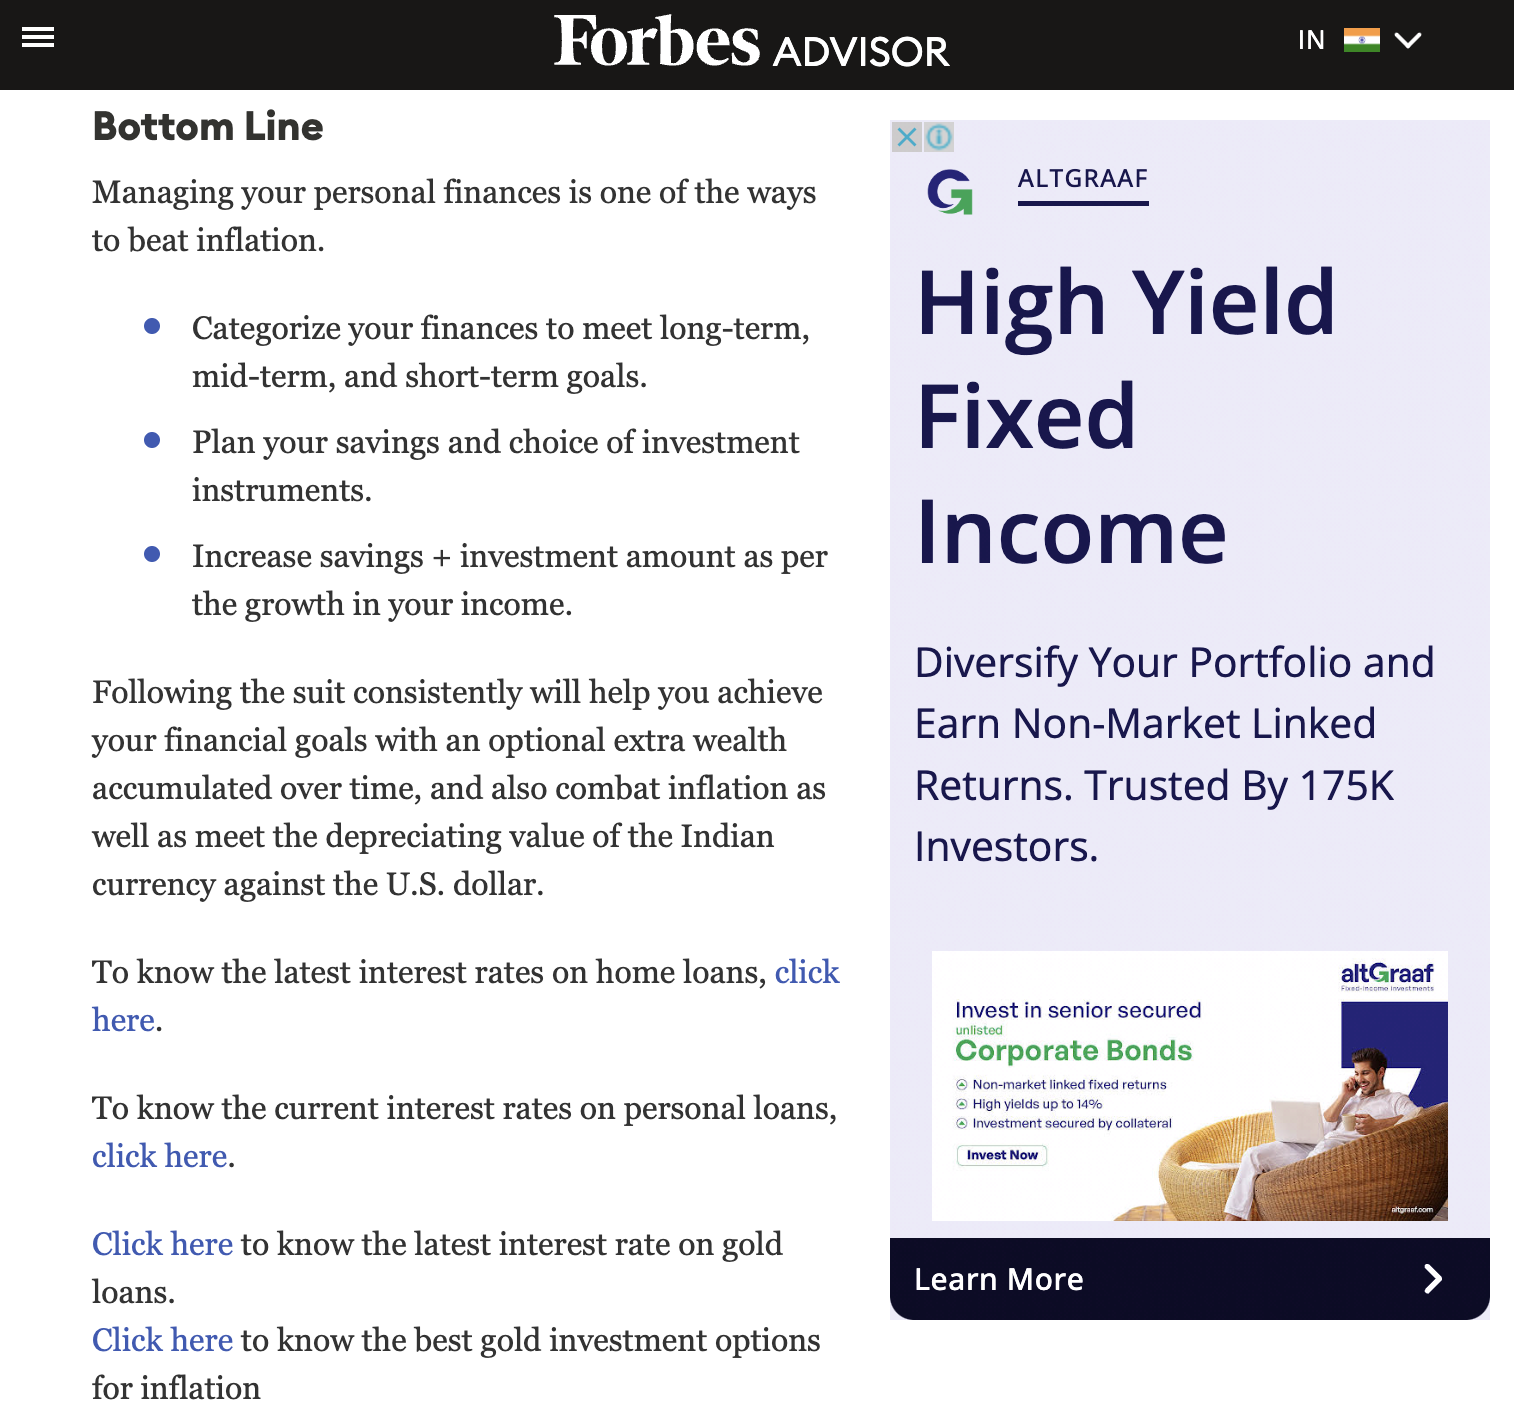 sidebar ad on Forbes shows an ad for personal finances with a call to action to learn more